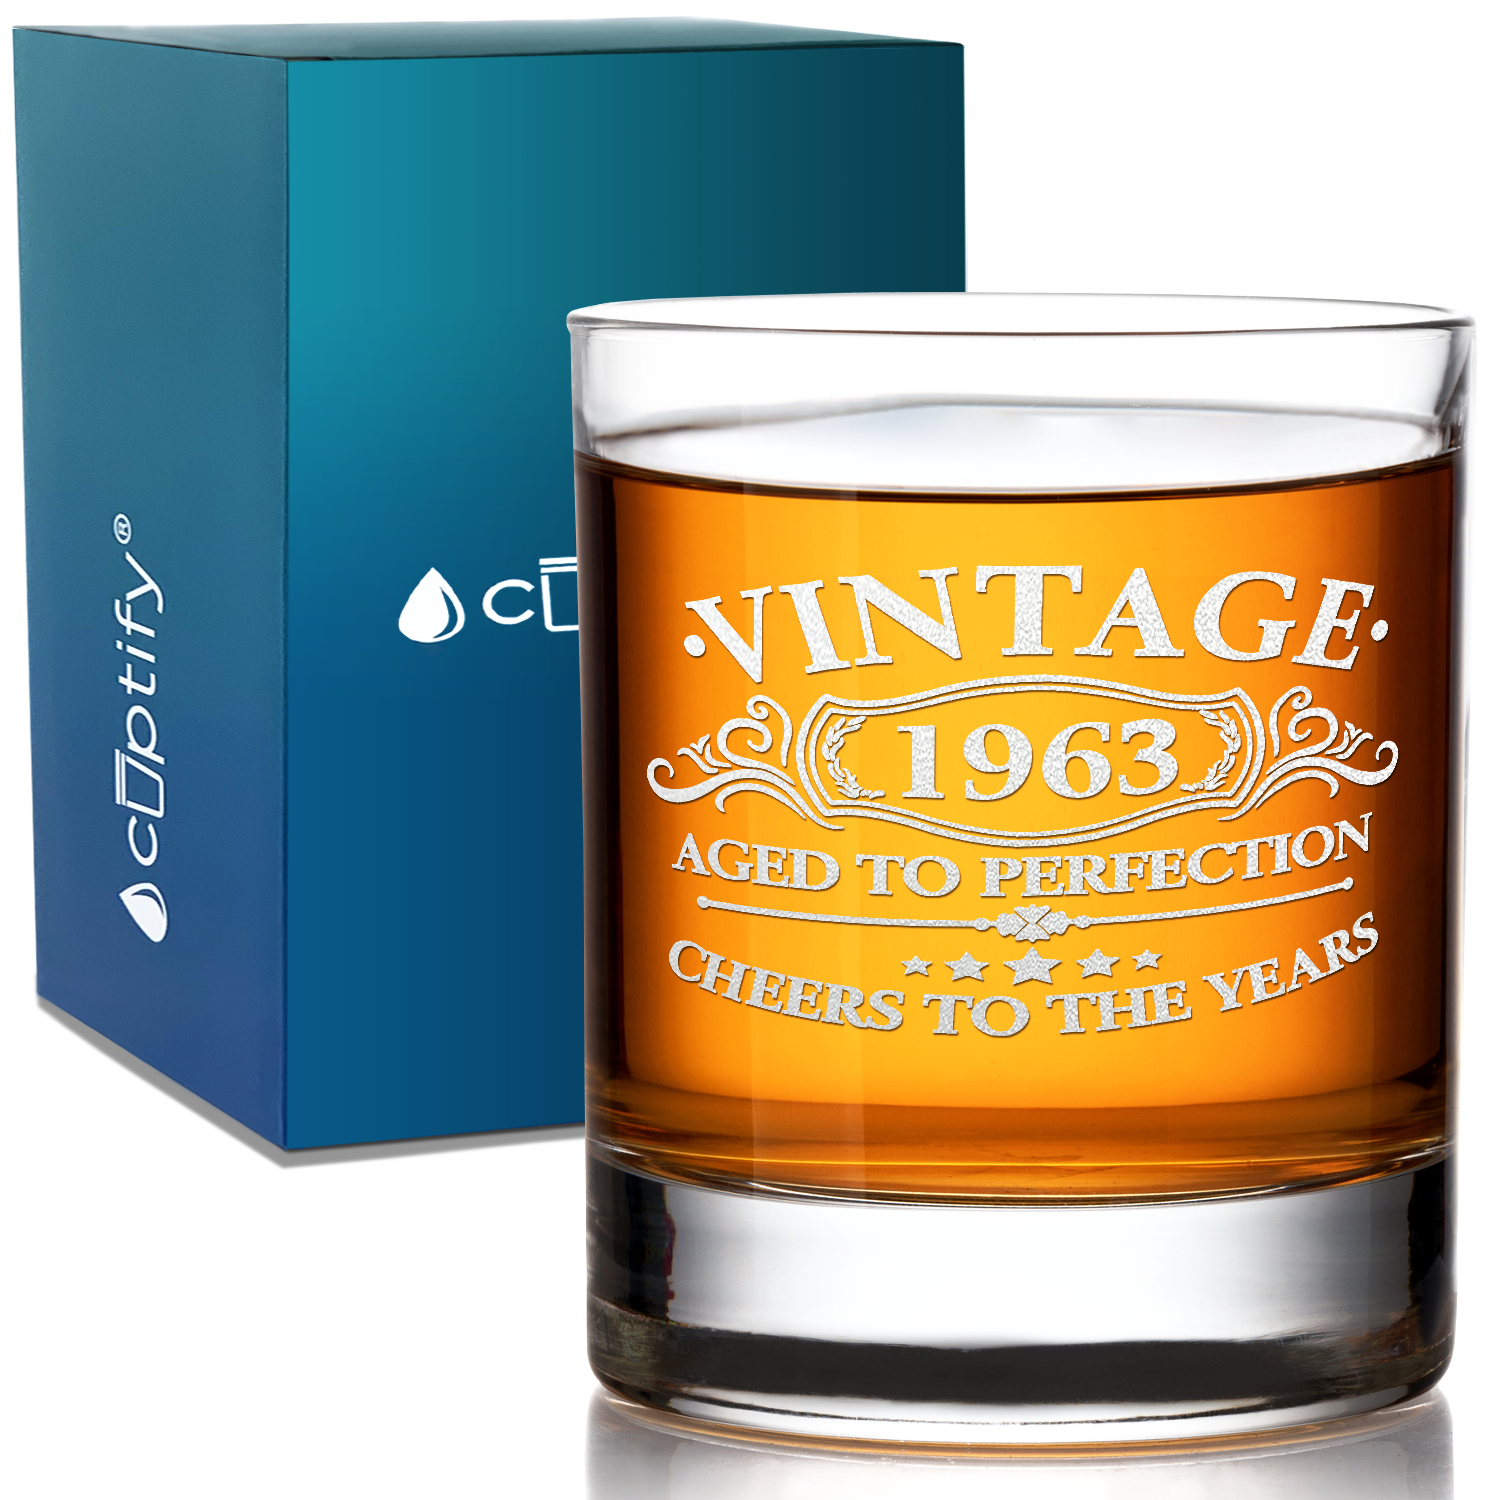 Vintage Aged To Perfection Cheers To 58 Years 1963 Laser Engraved on 10.25oz Old Fashion Glass